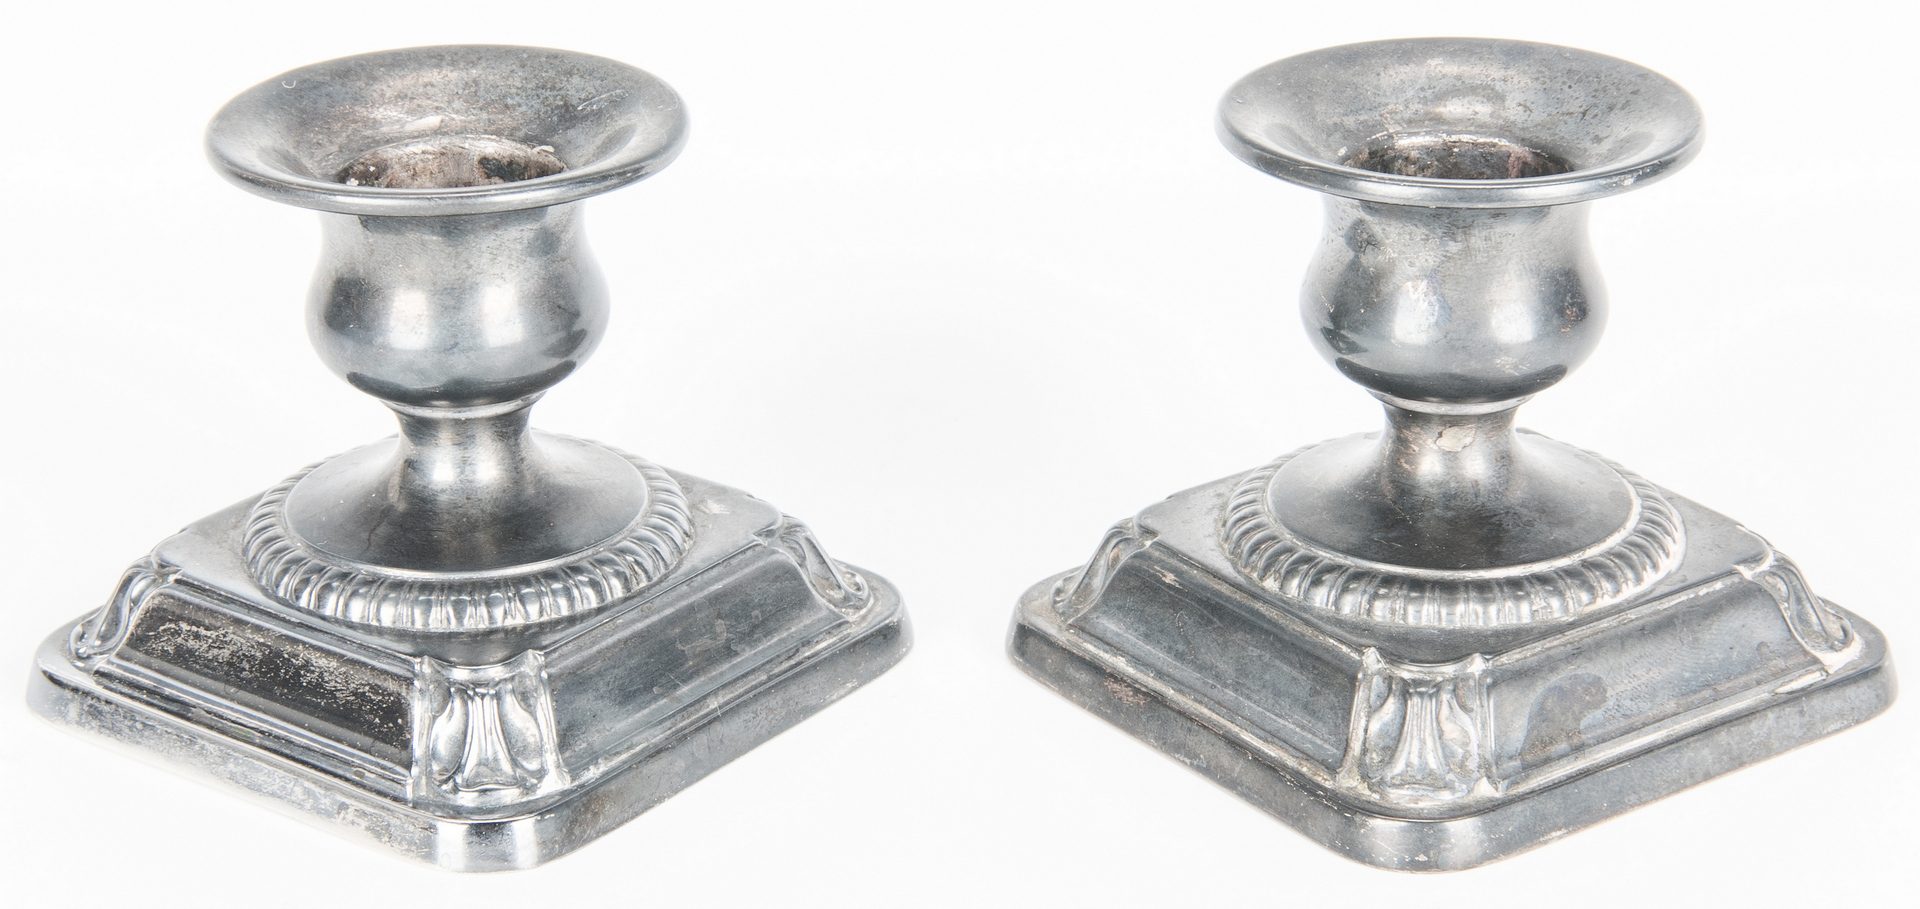 Lot 356: Wallace Sterling Bowl and Candlesticks